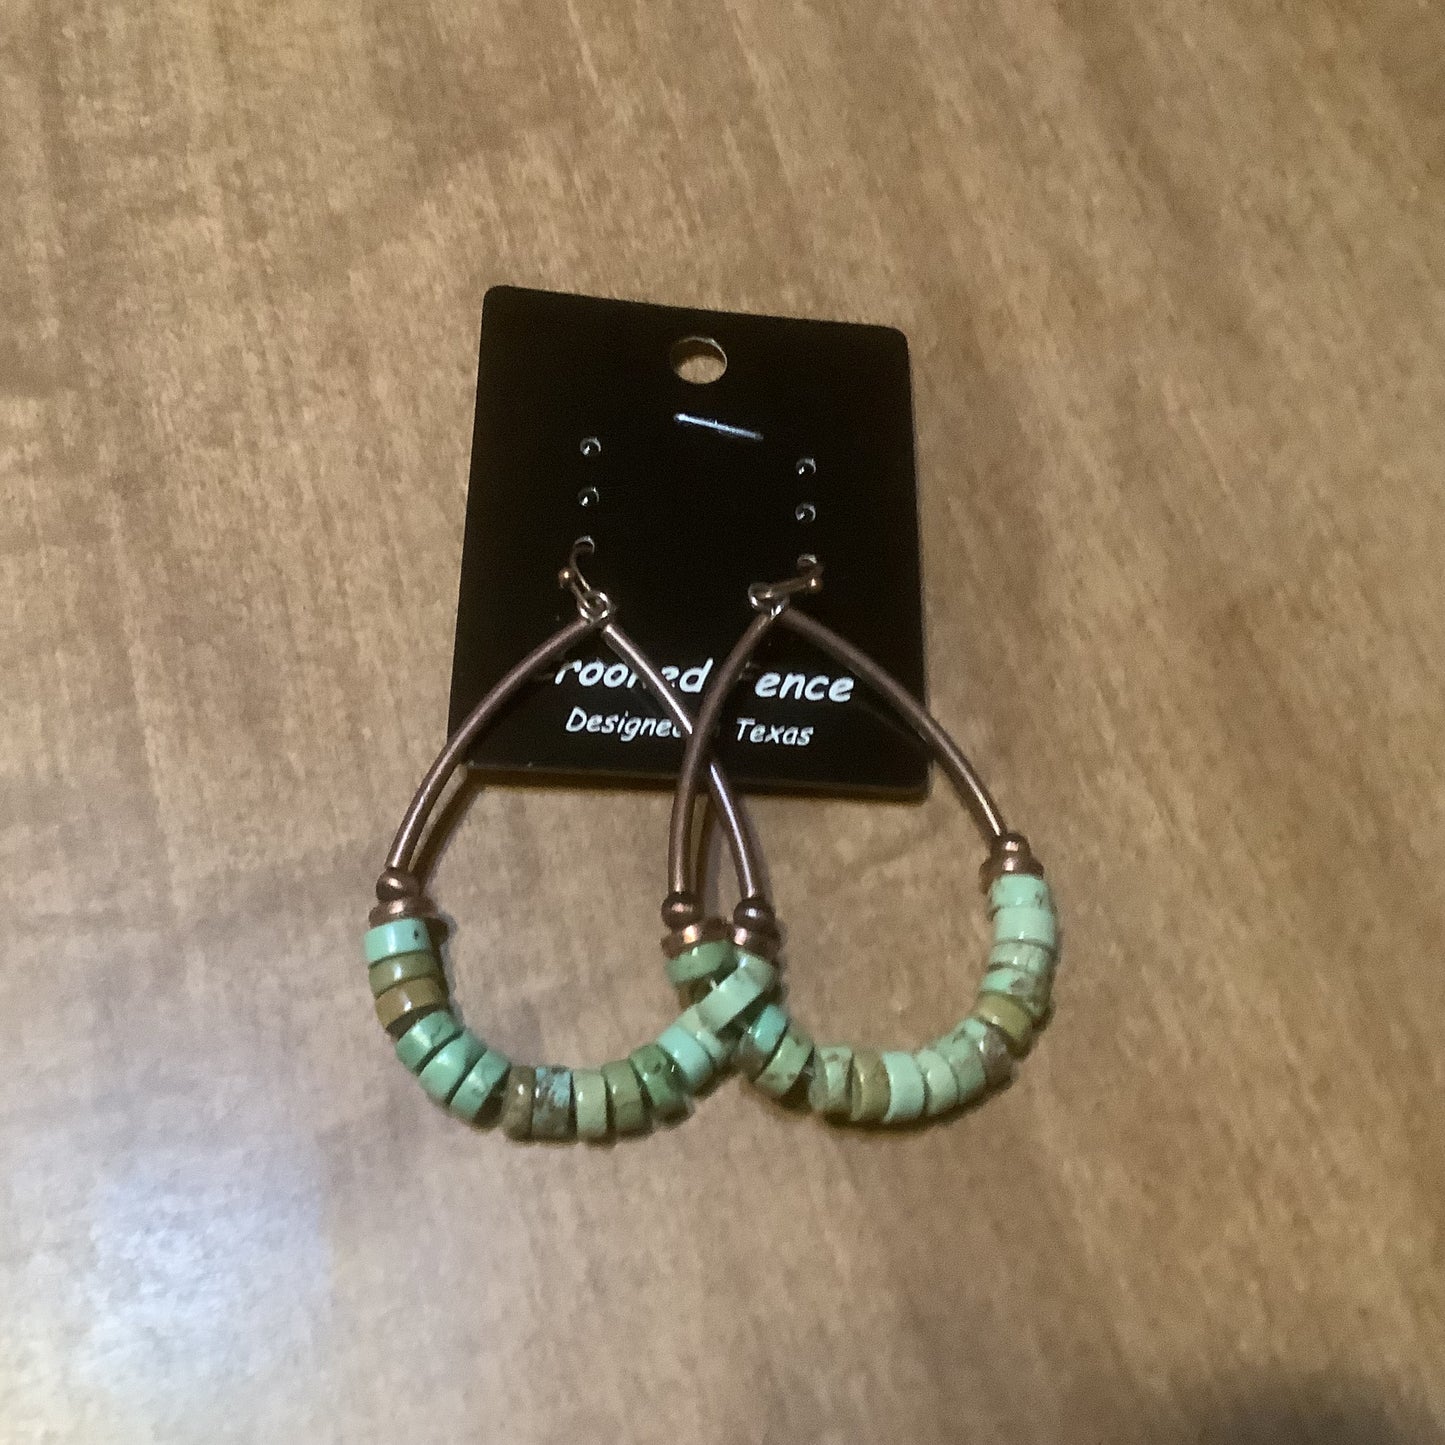 Earrings teardrop loops with turquoise, white and green stone beads  ERZ210925-37, ERZ210925-39, ERZ210925-40,